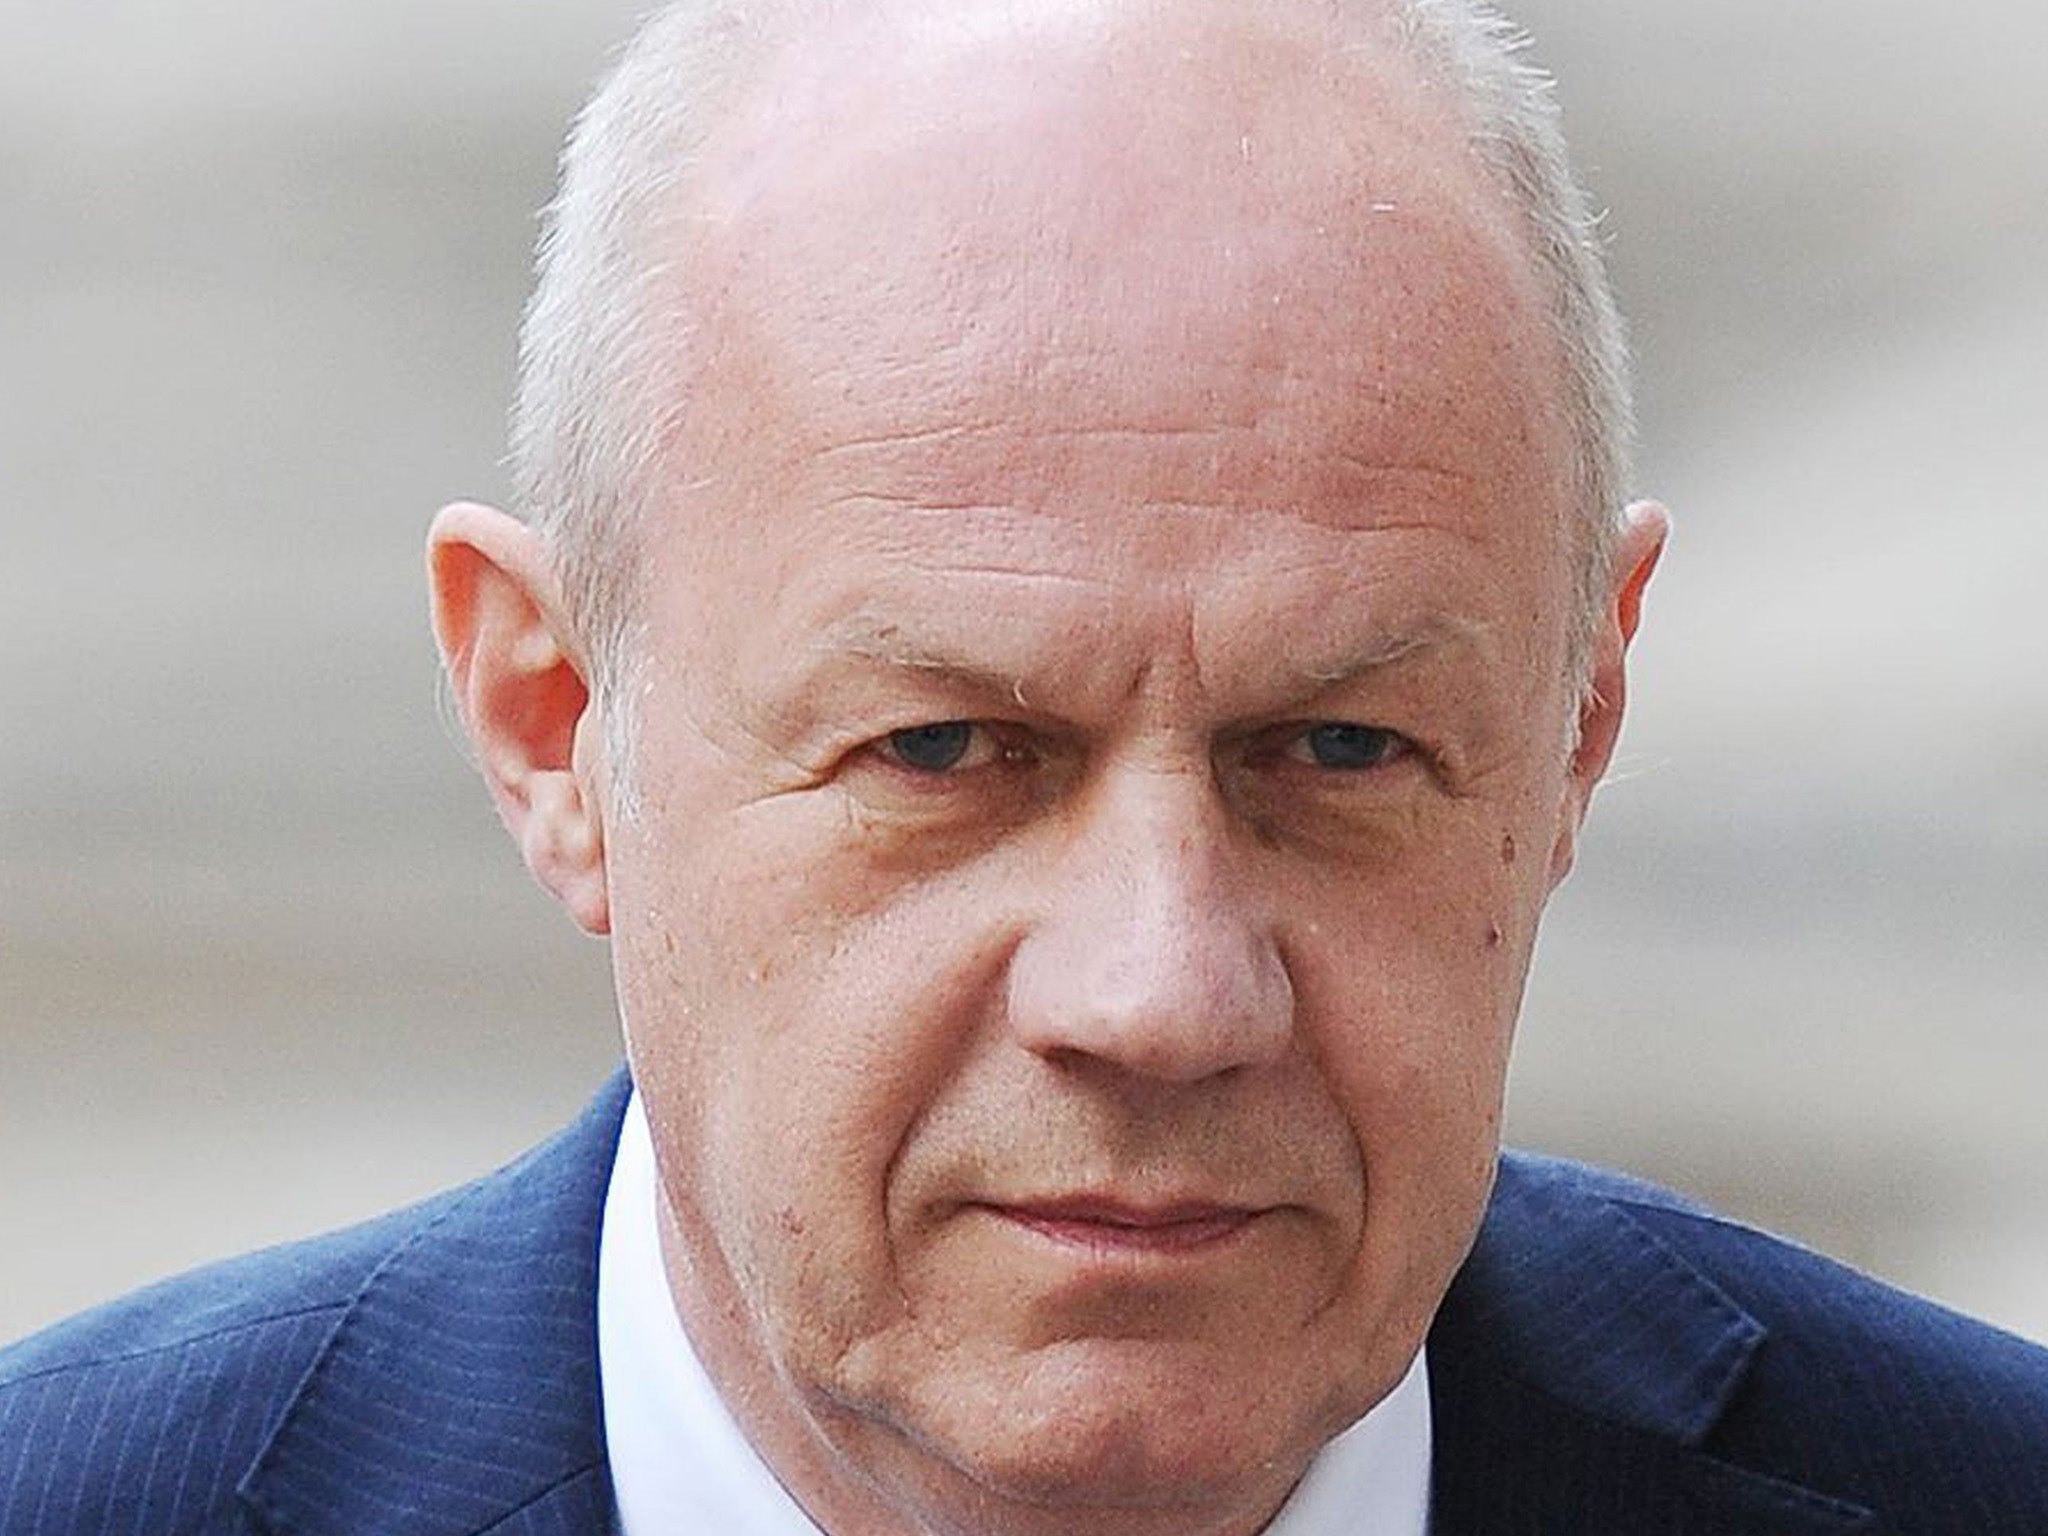 Damian Green computer porn allegations should not have been leaked ...